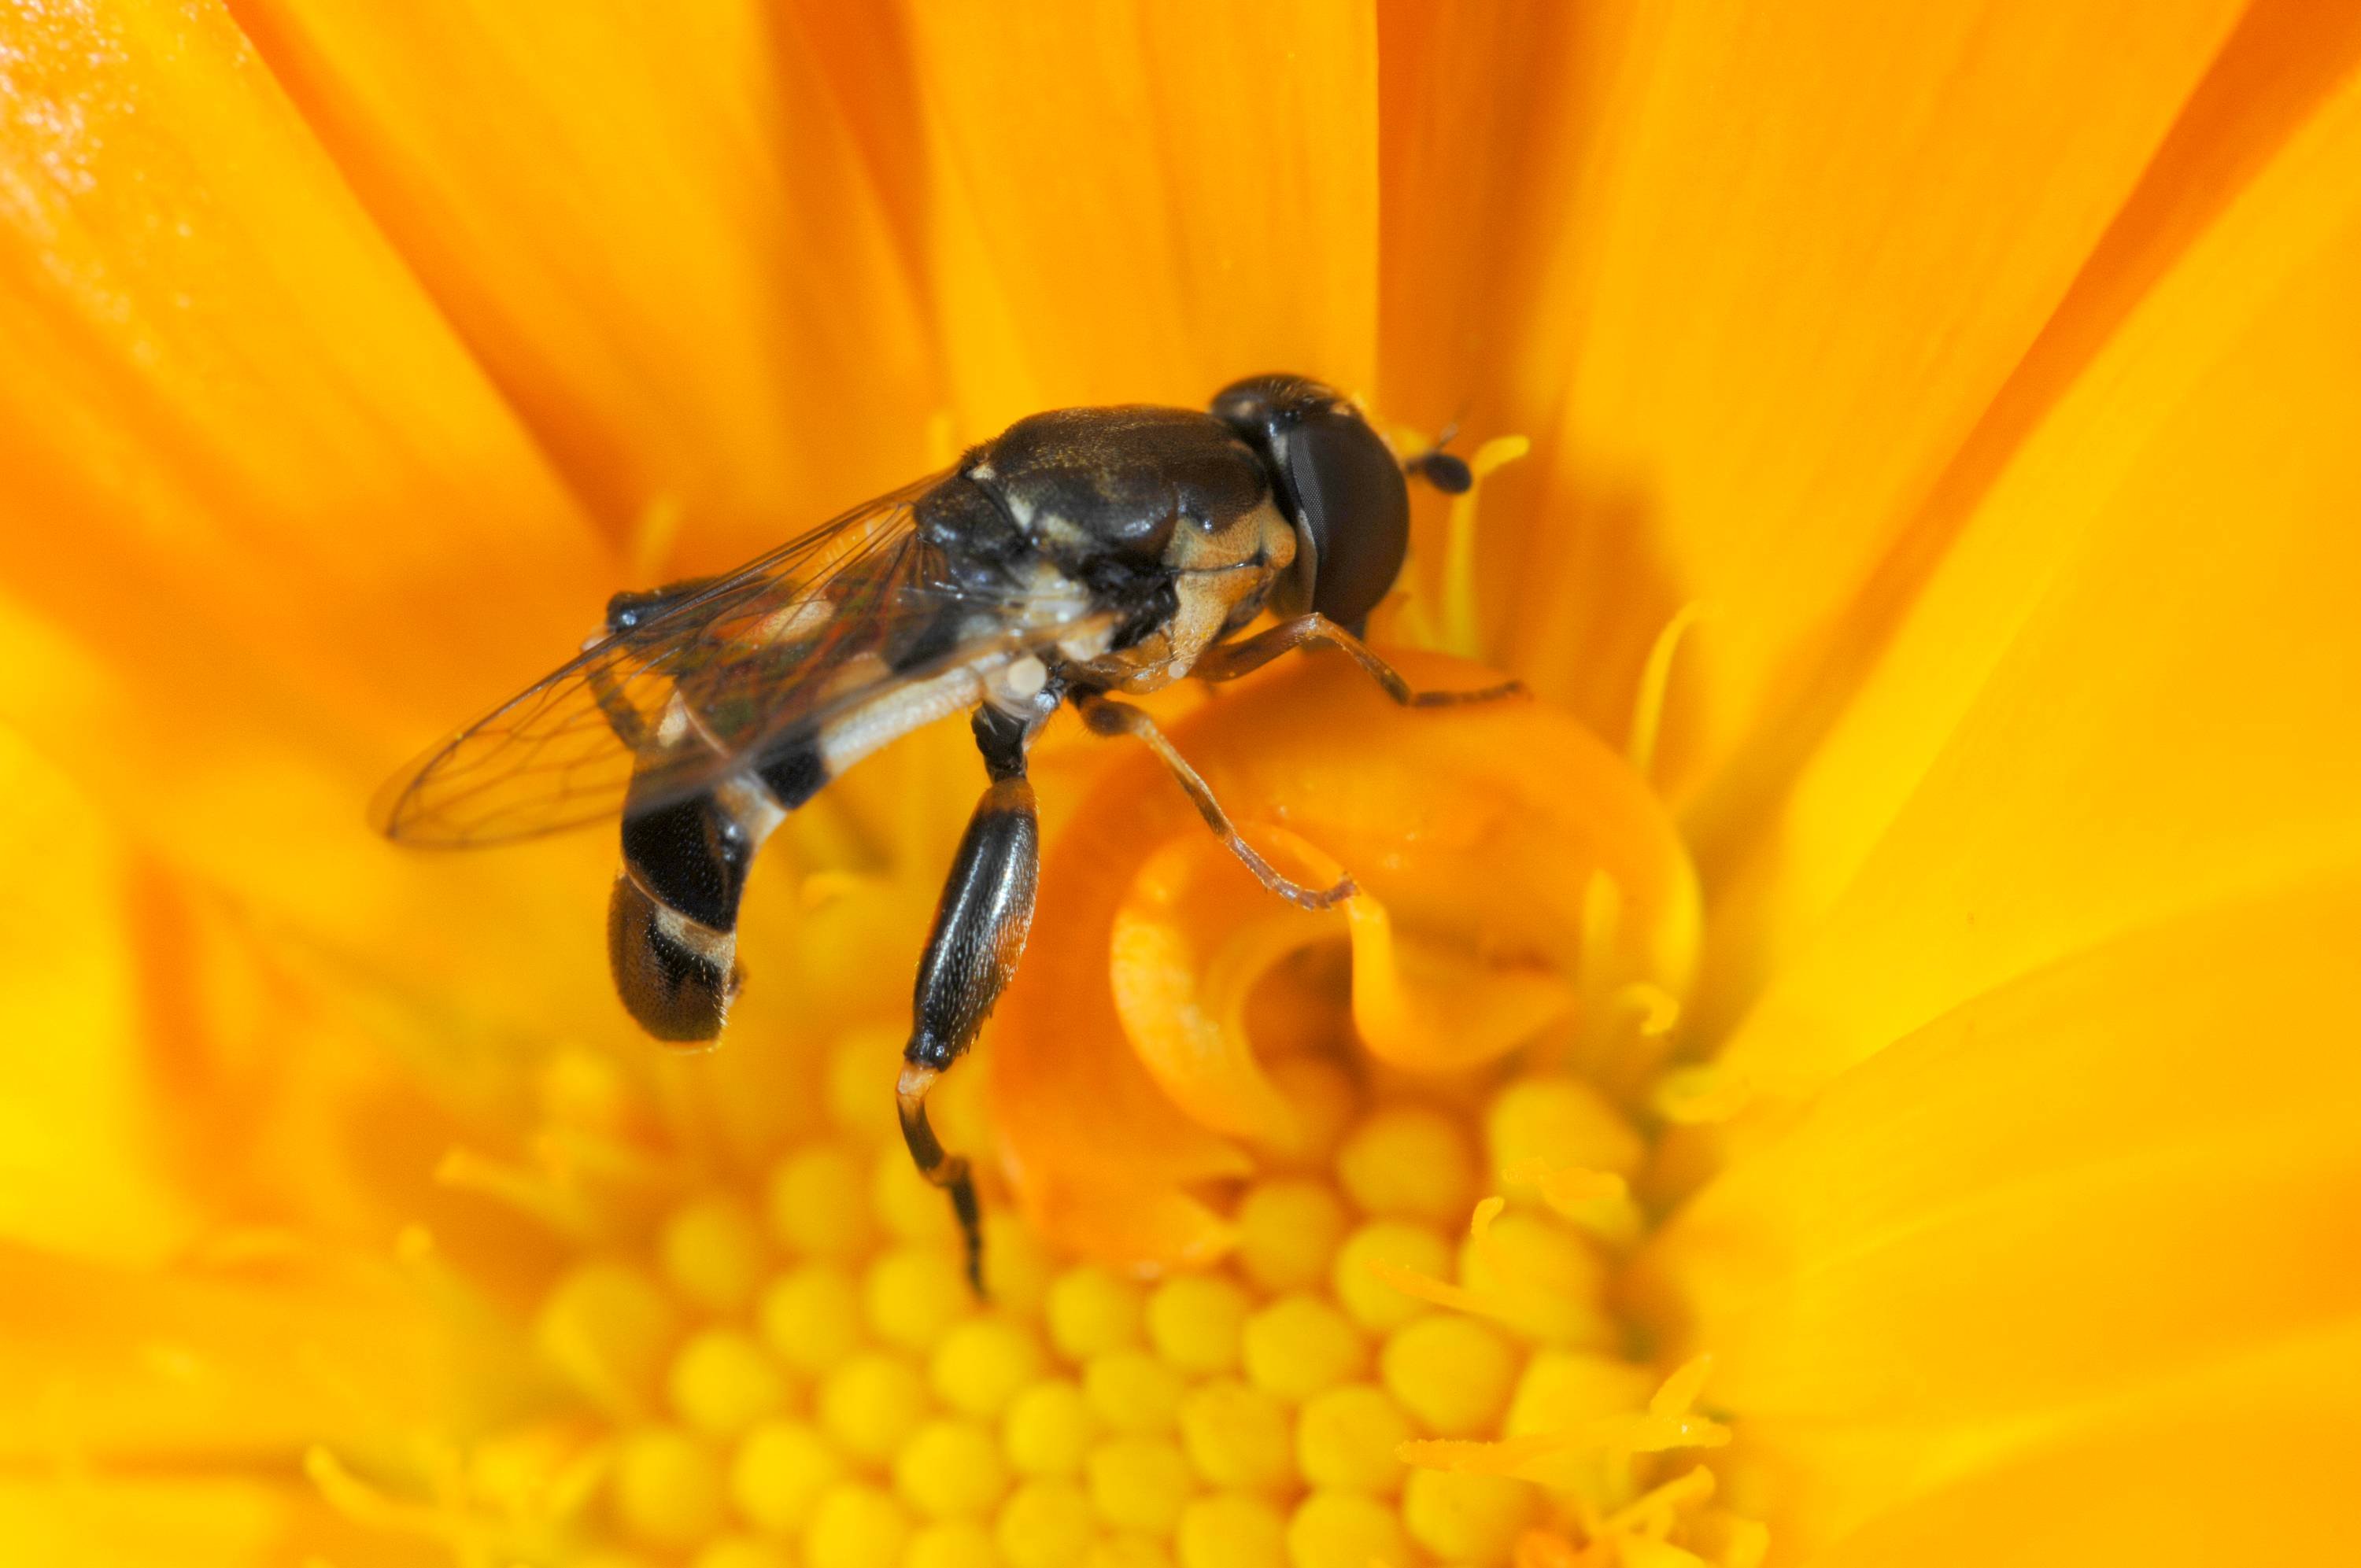 A hoverfly sitting in a yellow flower.